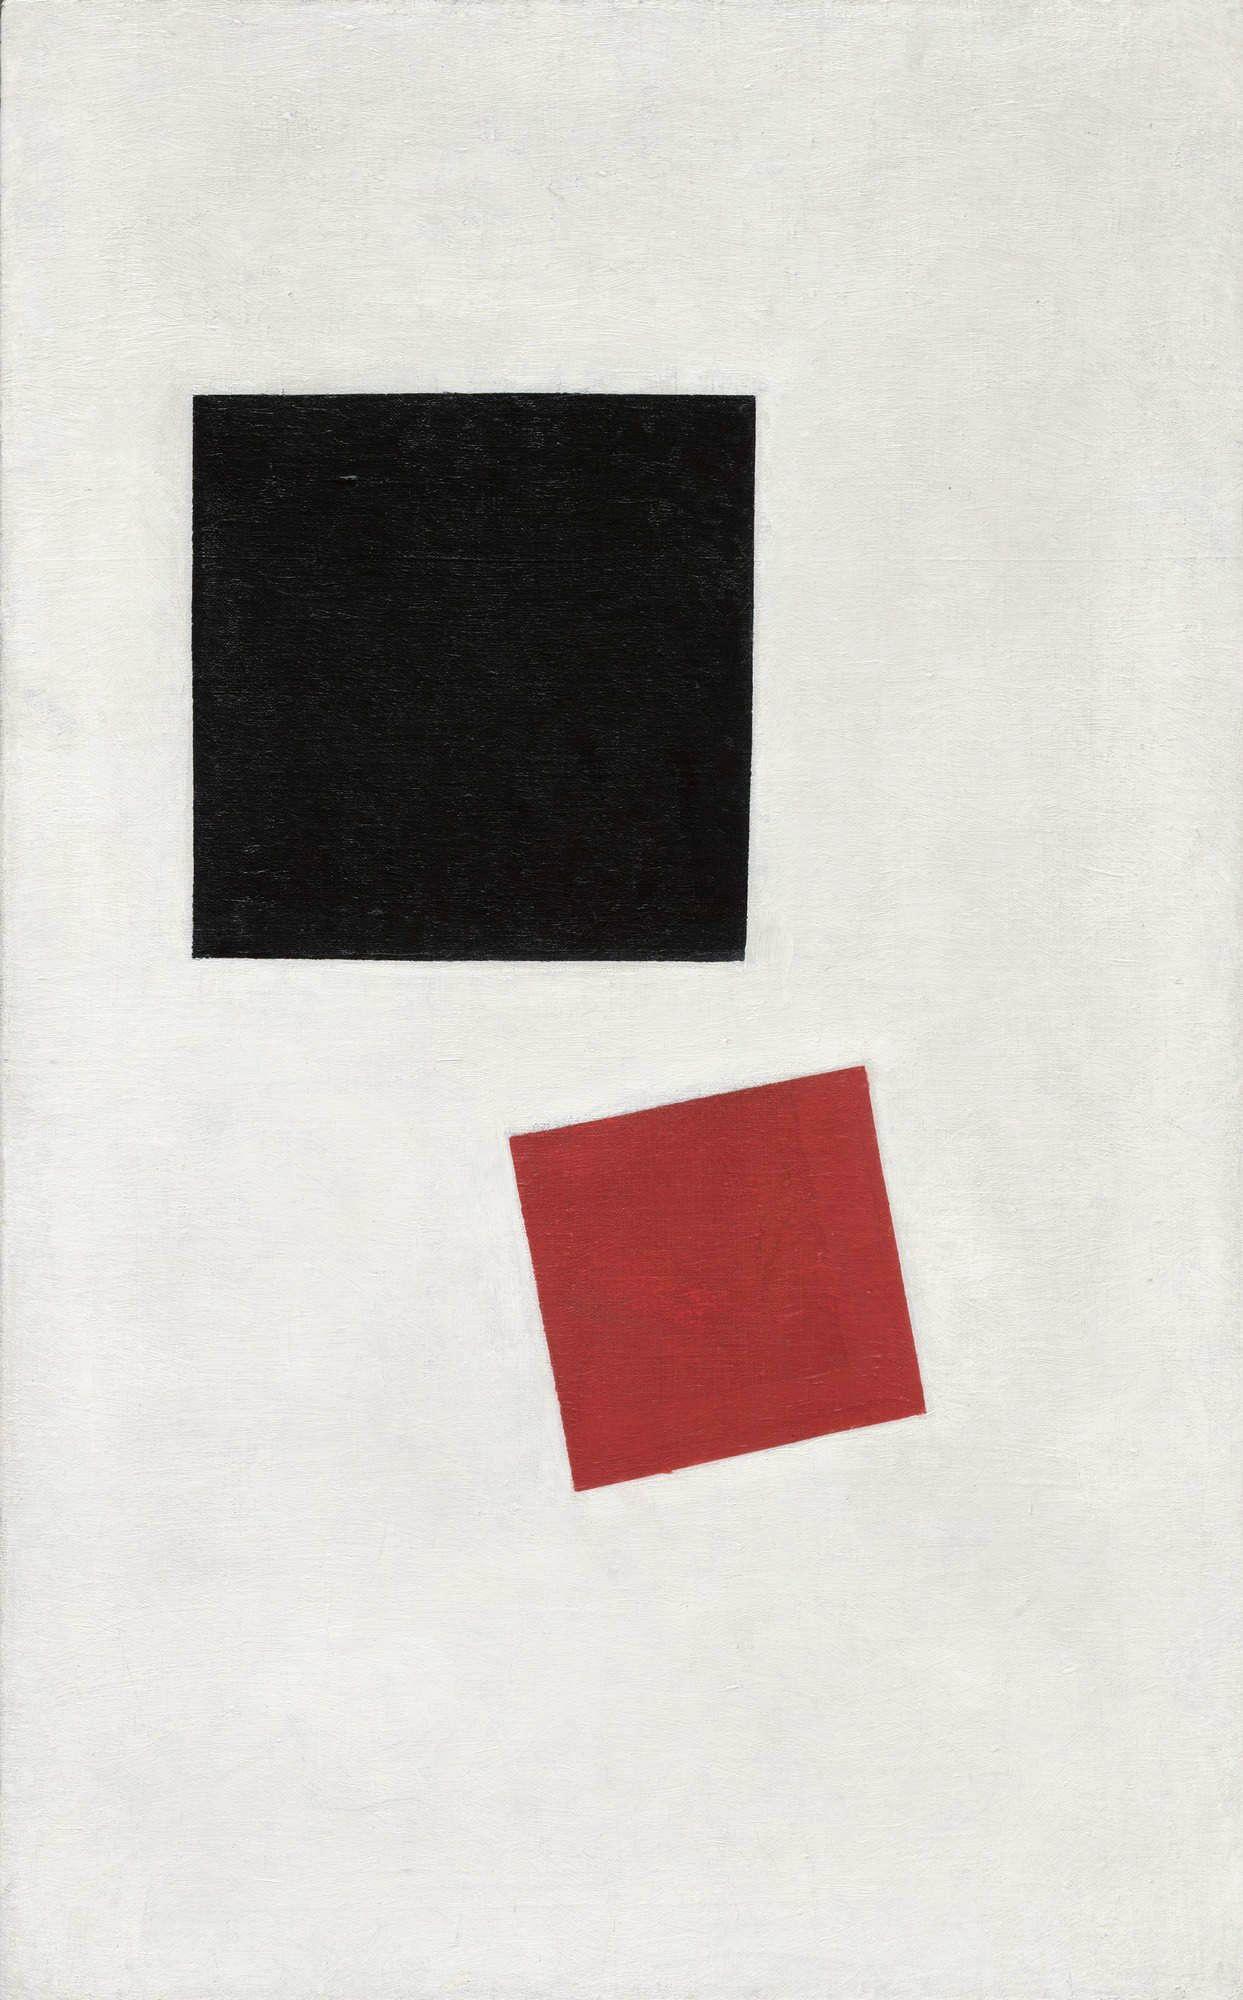 Red and Black Square Logo - Kazimir Malevich Square and Red Square, 1915. Trivium Art